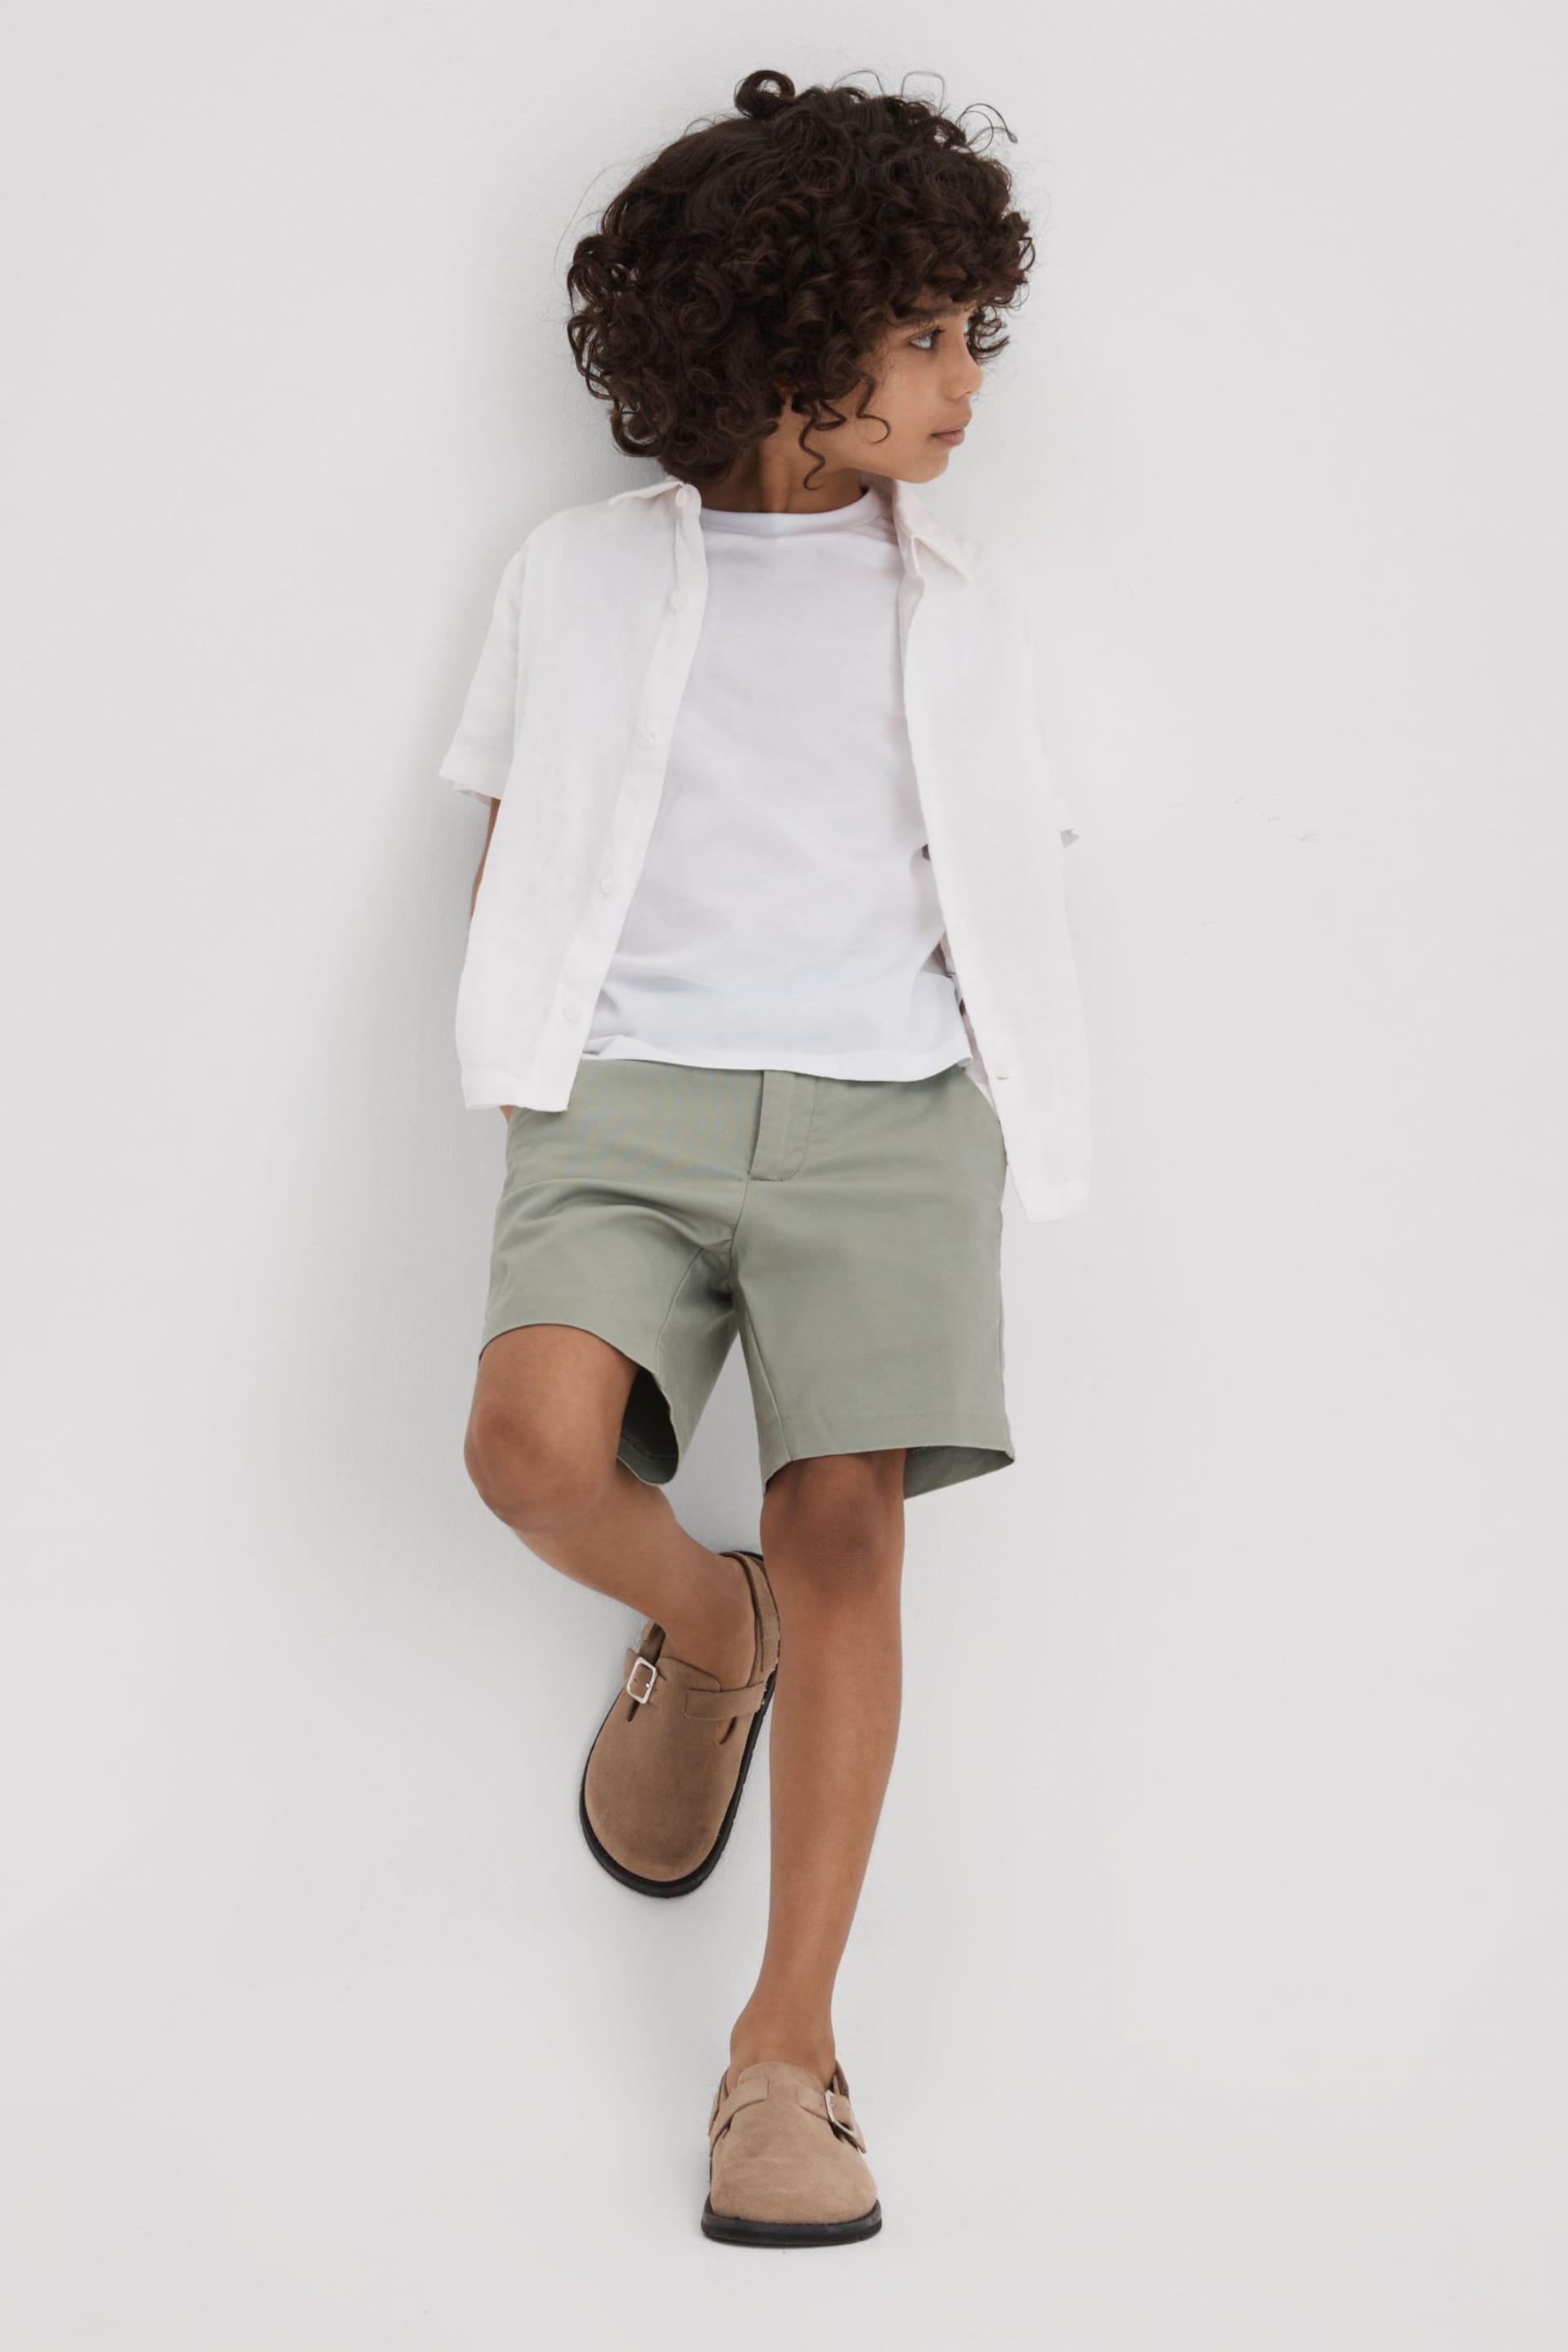 Reiss Pistachio Wicket Junior Casual Chino Shorts - Image 3 of 4